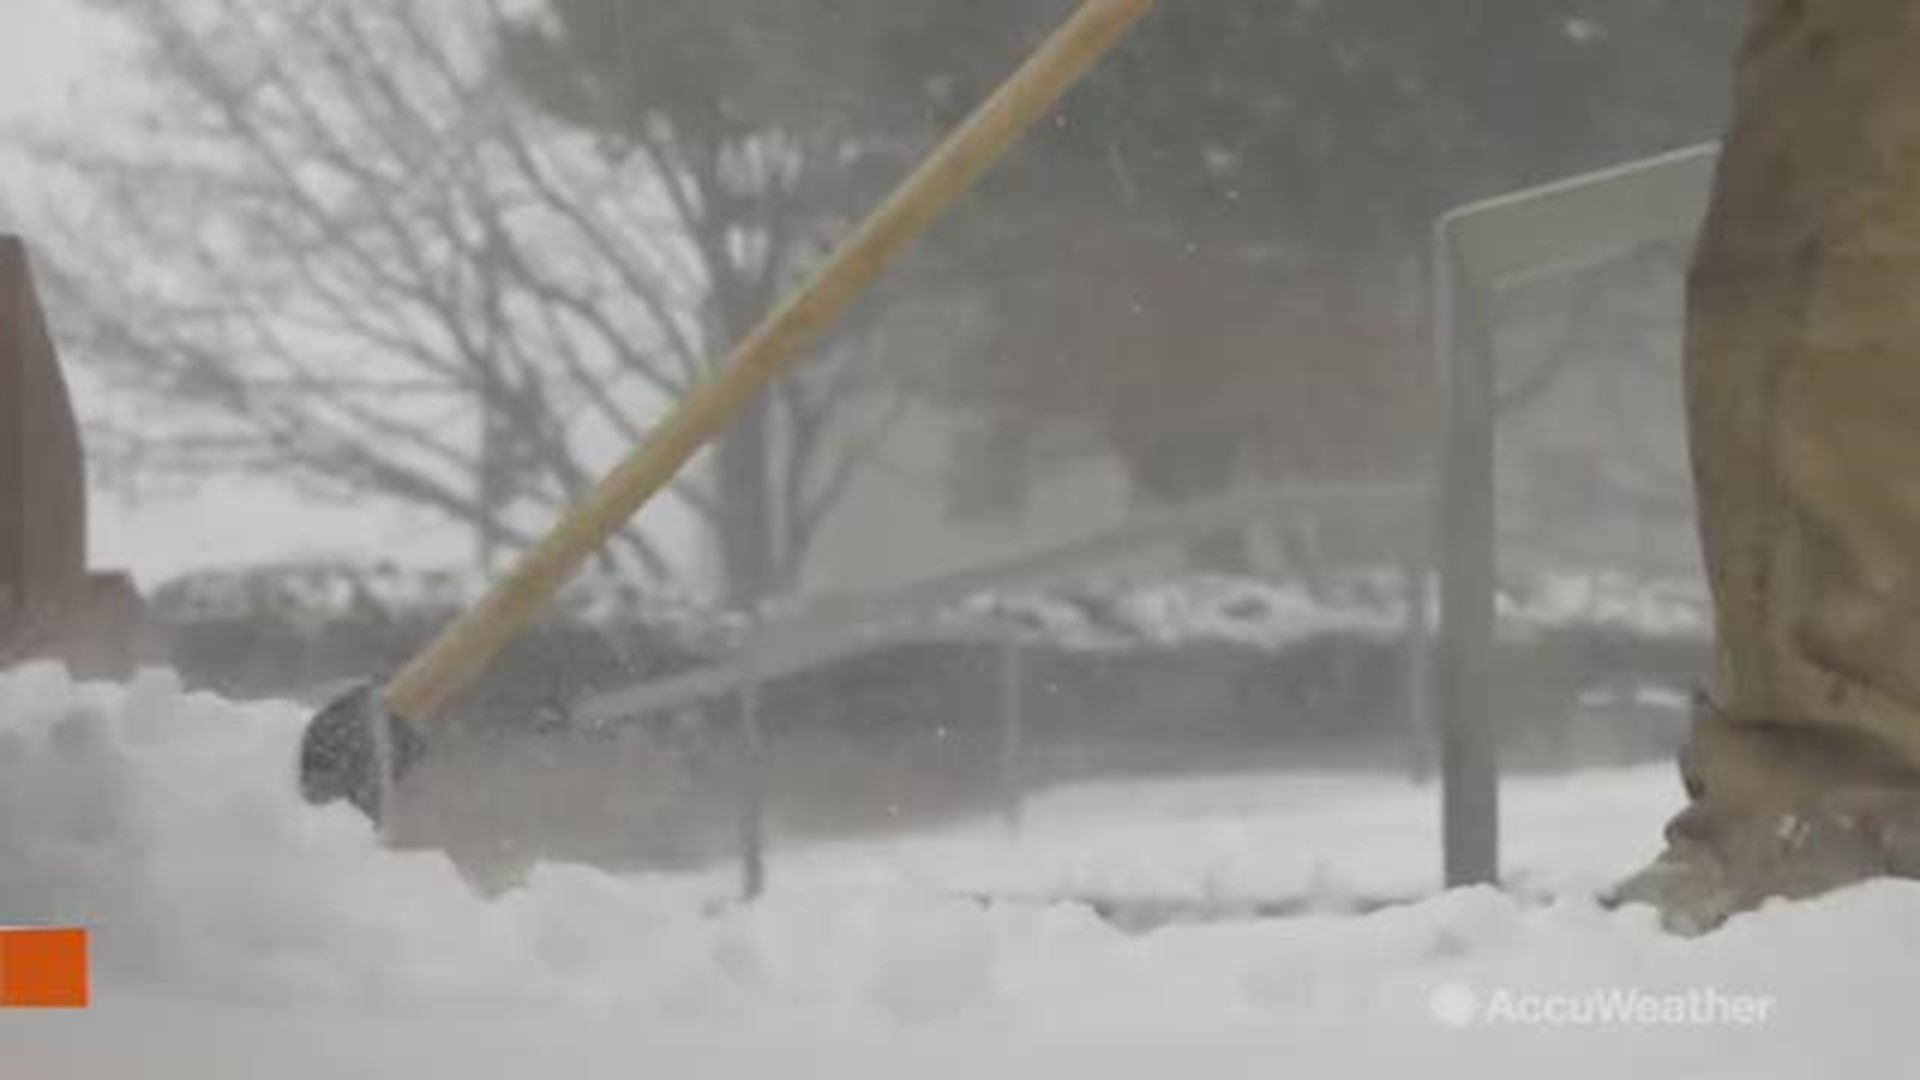 Snow plows are working overtime in Toledo, Ohio to keep the streets clear as a major winter storm hits with full force.